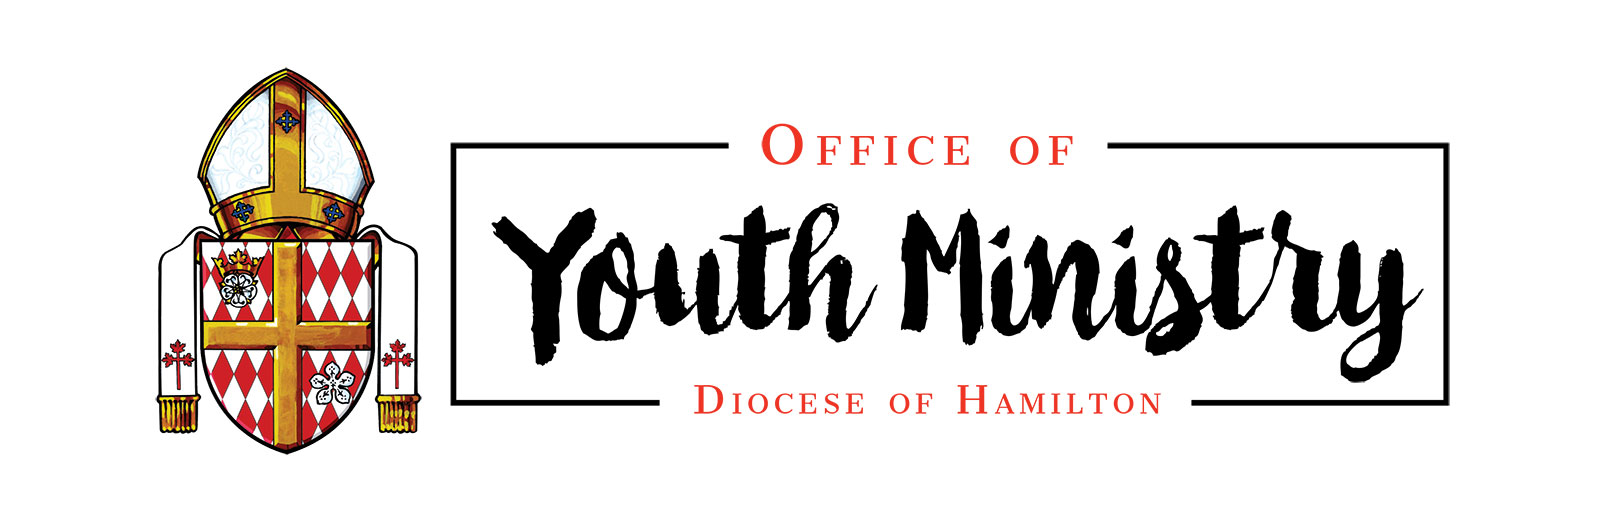 Text and logo for Diocese of Hamilton: Office of Youth Ministry